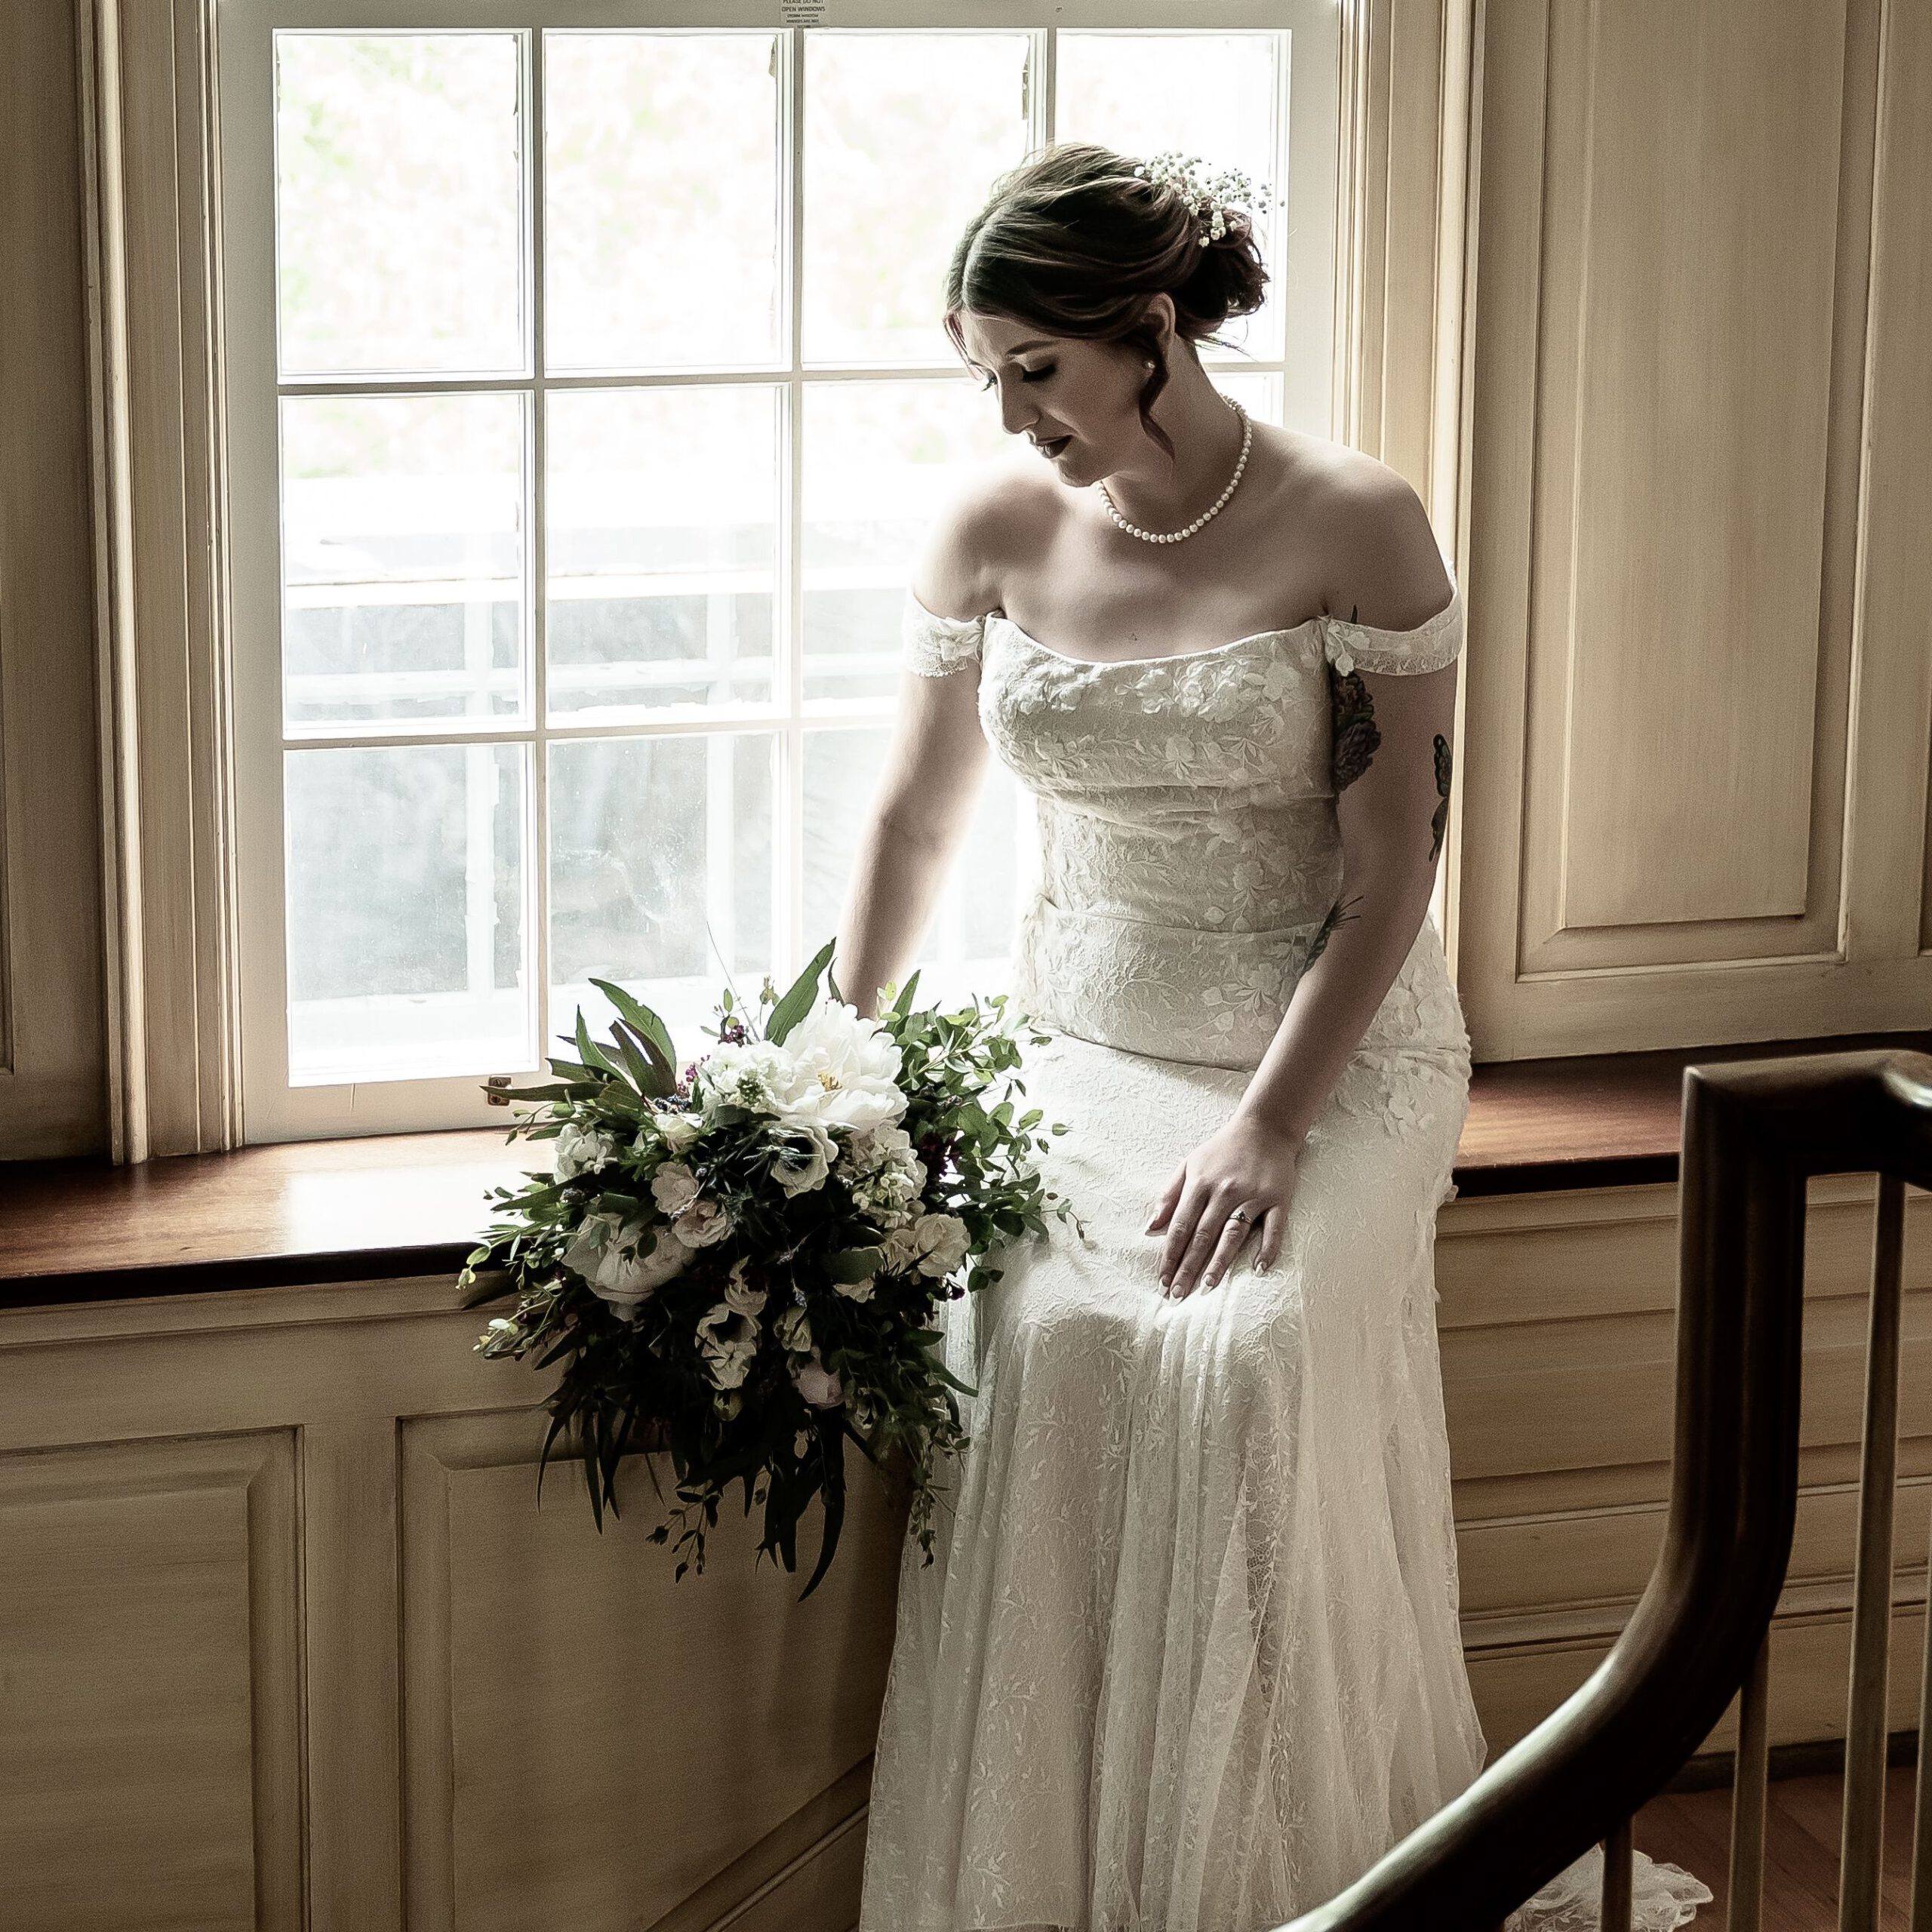 A bride sits with her bouquet in front of a large window, the light charming her white gown. She looks down at the flowers at her side, a hand resting on her knee.